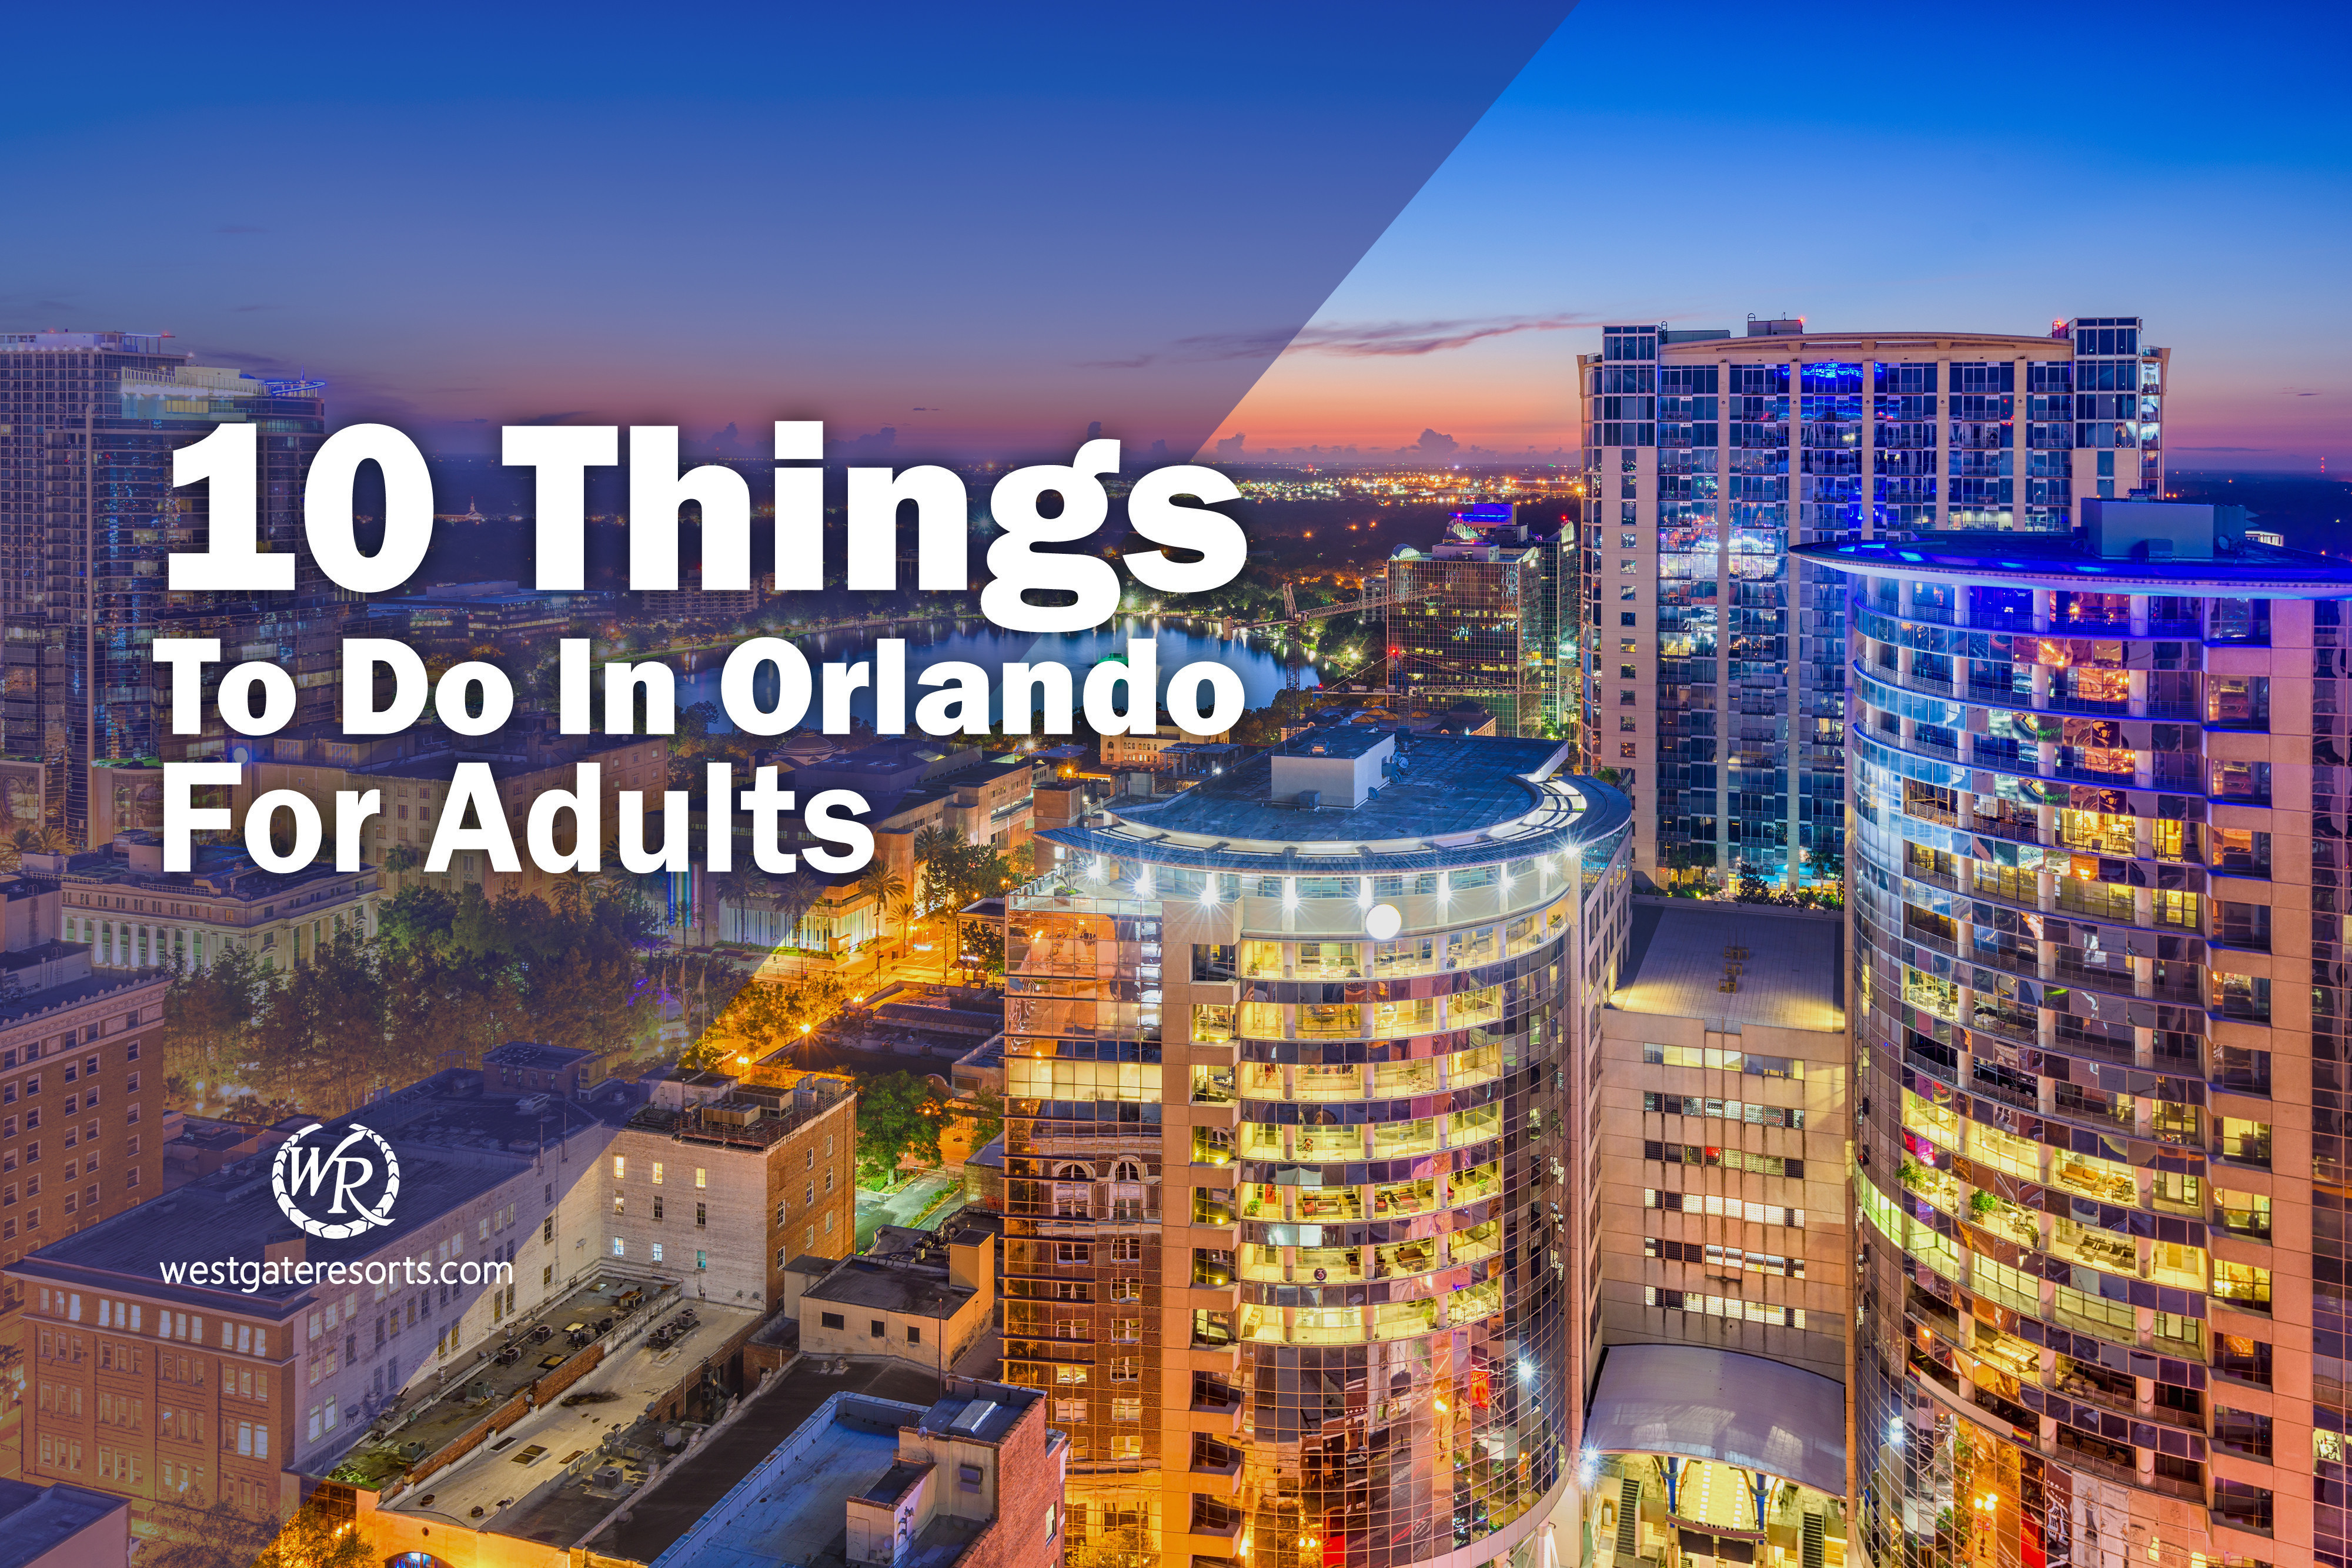 10 Things to do in Orlando for Adults